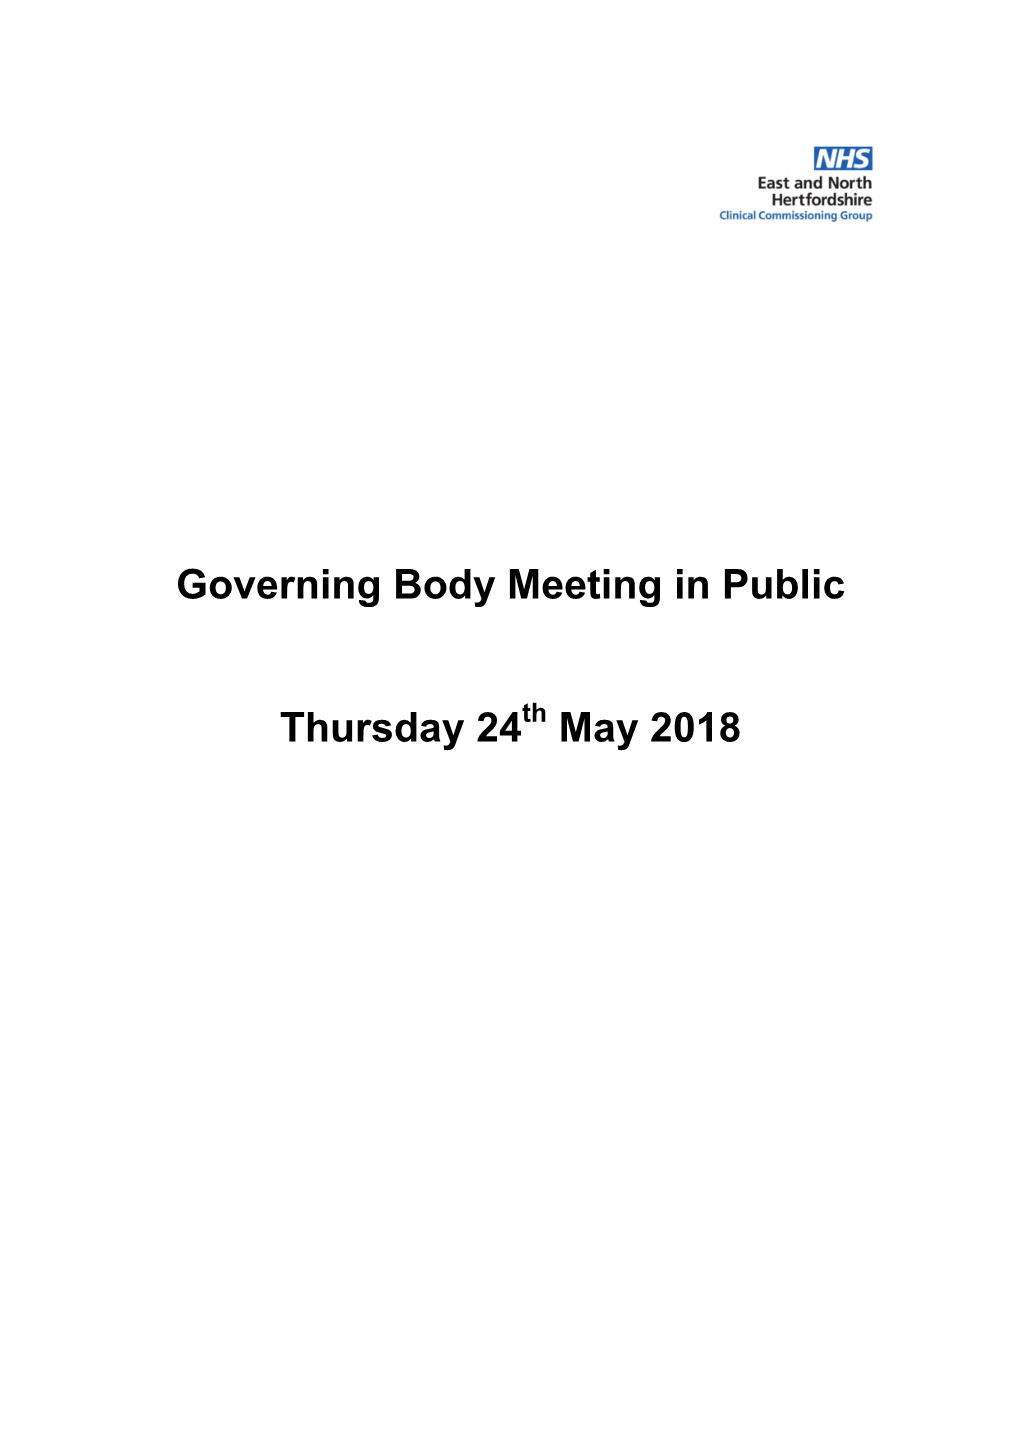 Governing Body Meeting in Public Thursday 24 May 2018